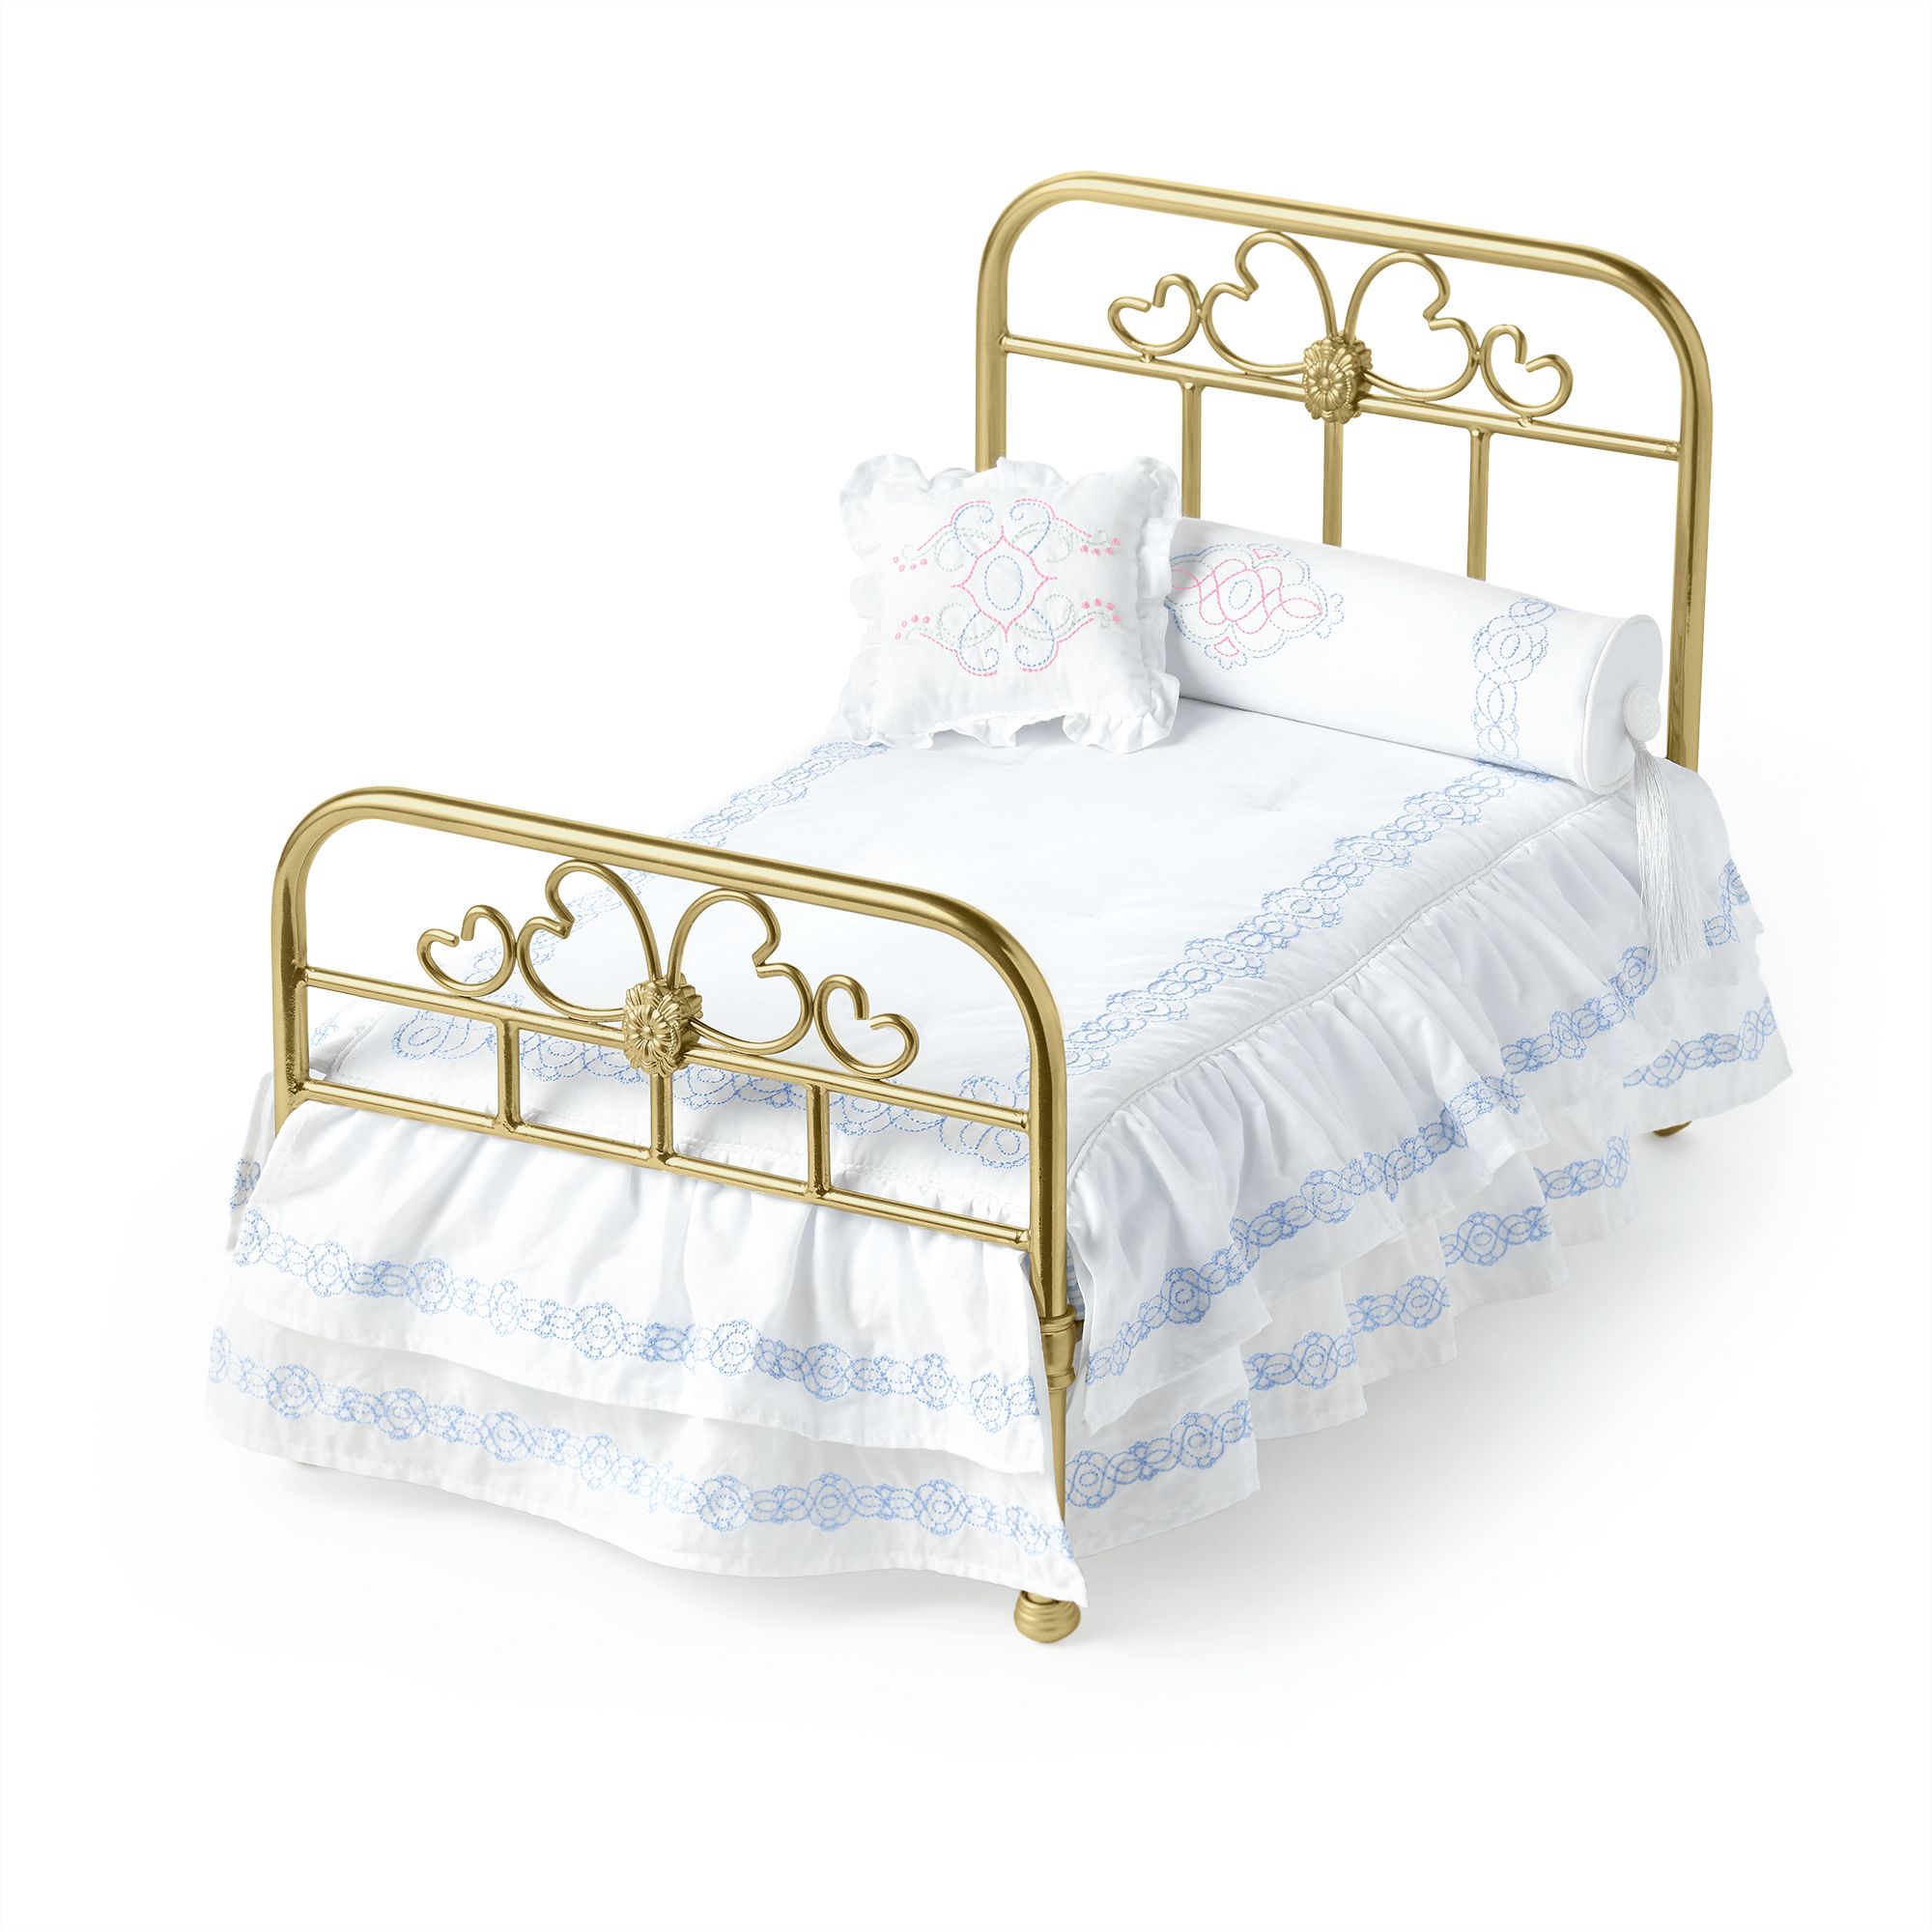 american girl samantha bed and bedding